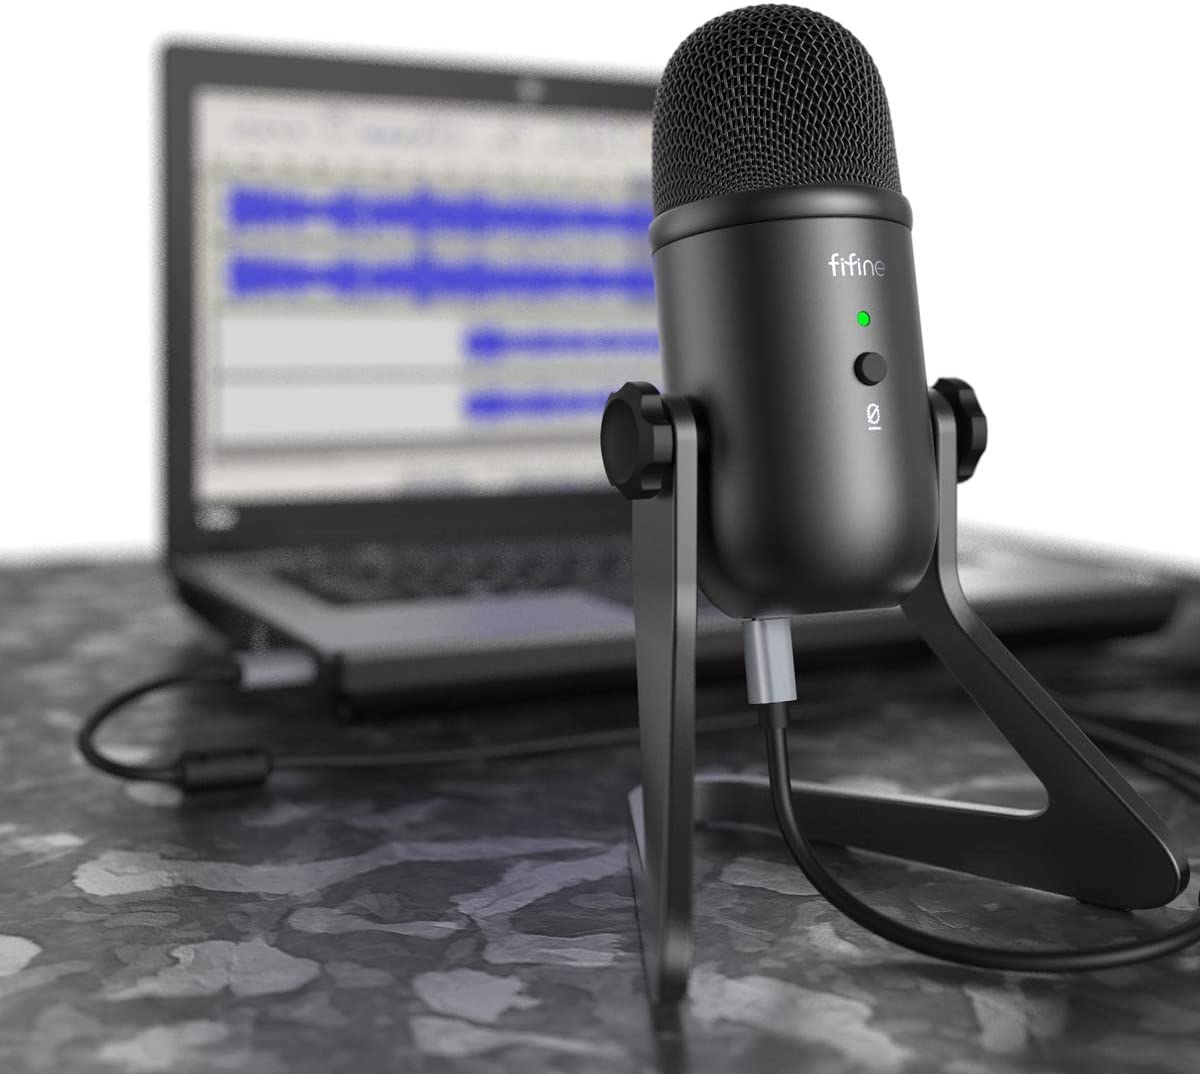 Fifine K678 USB Condenser Microphone for Recording, Streaming, Podcasting for Desktop Computers